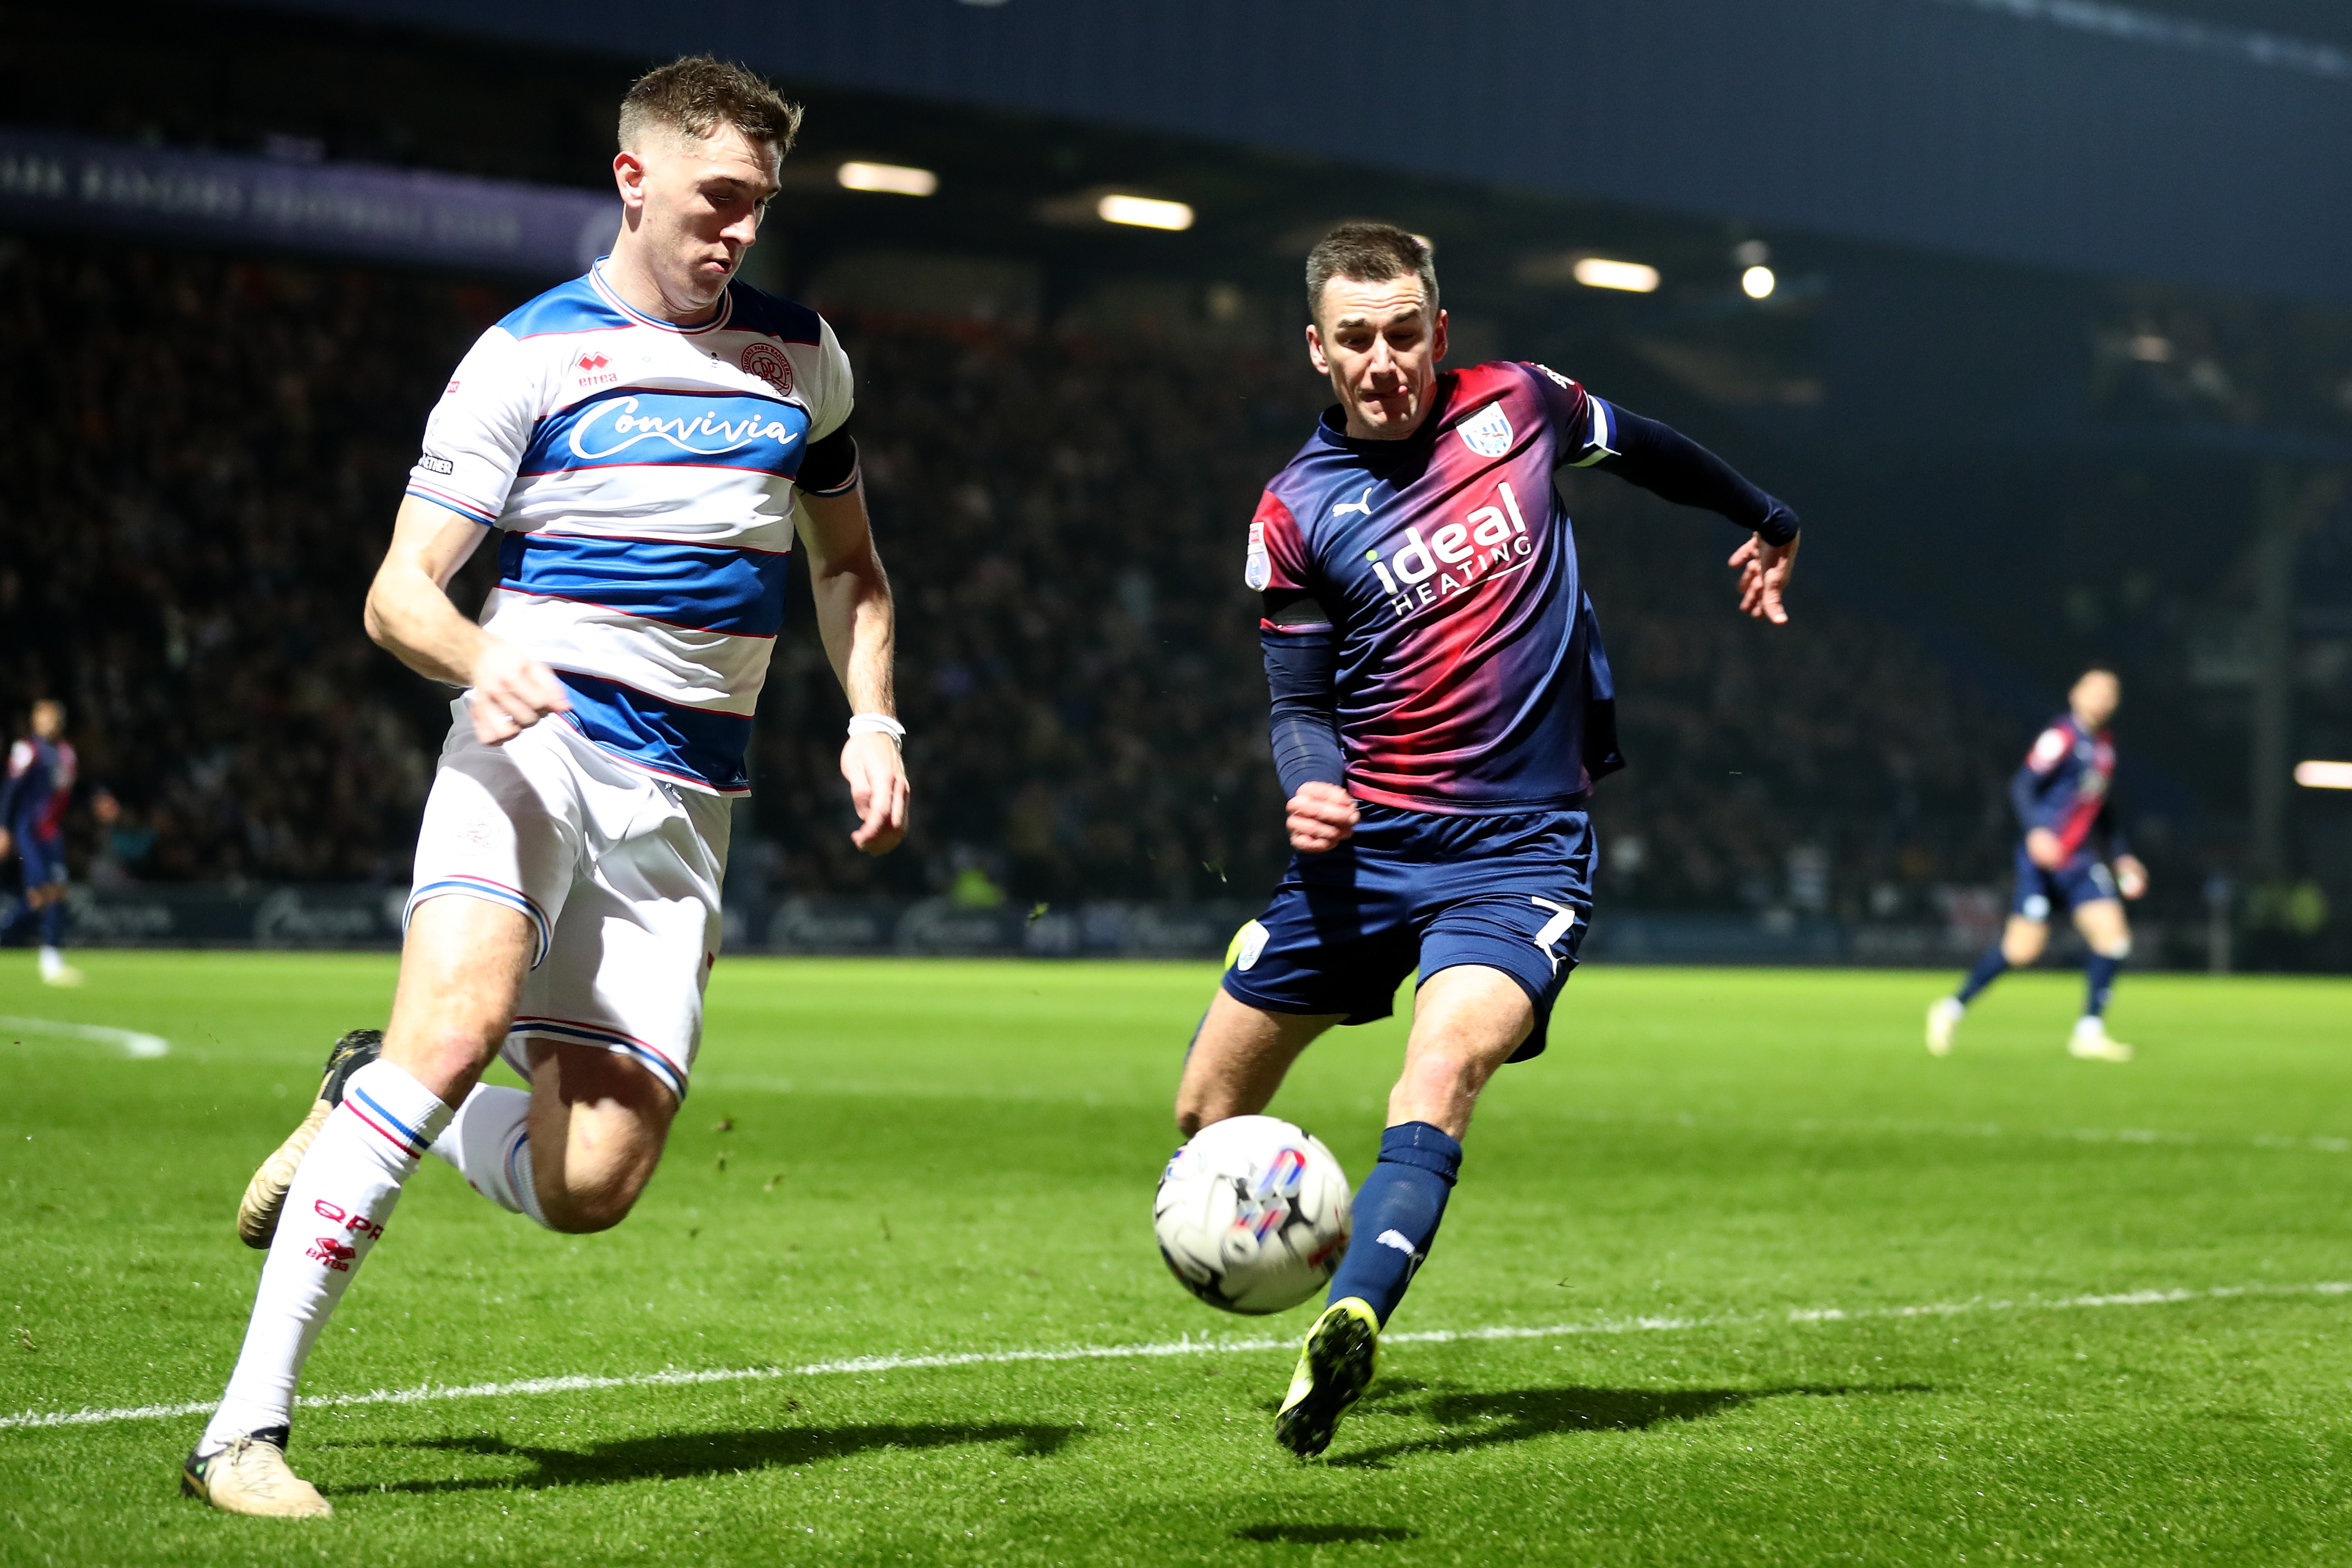 Jed Wallace chasing down the ball and a QPR player 